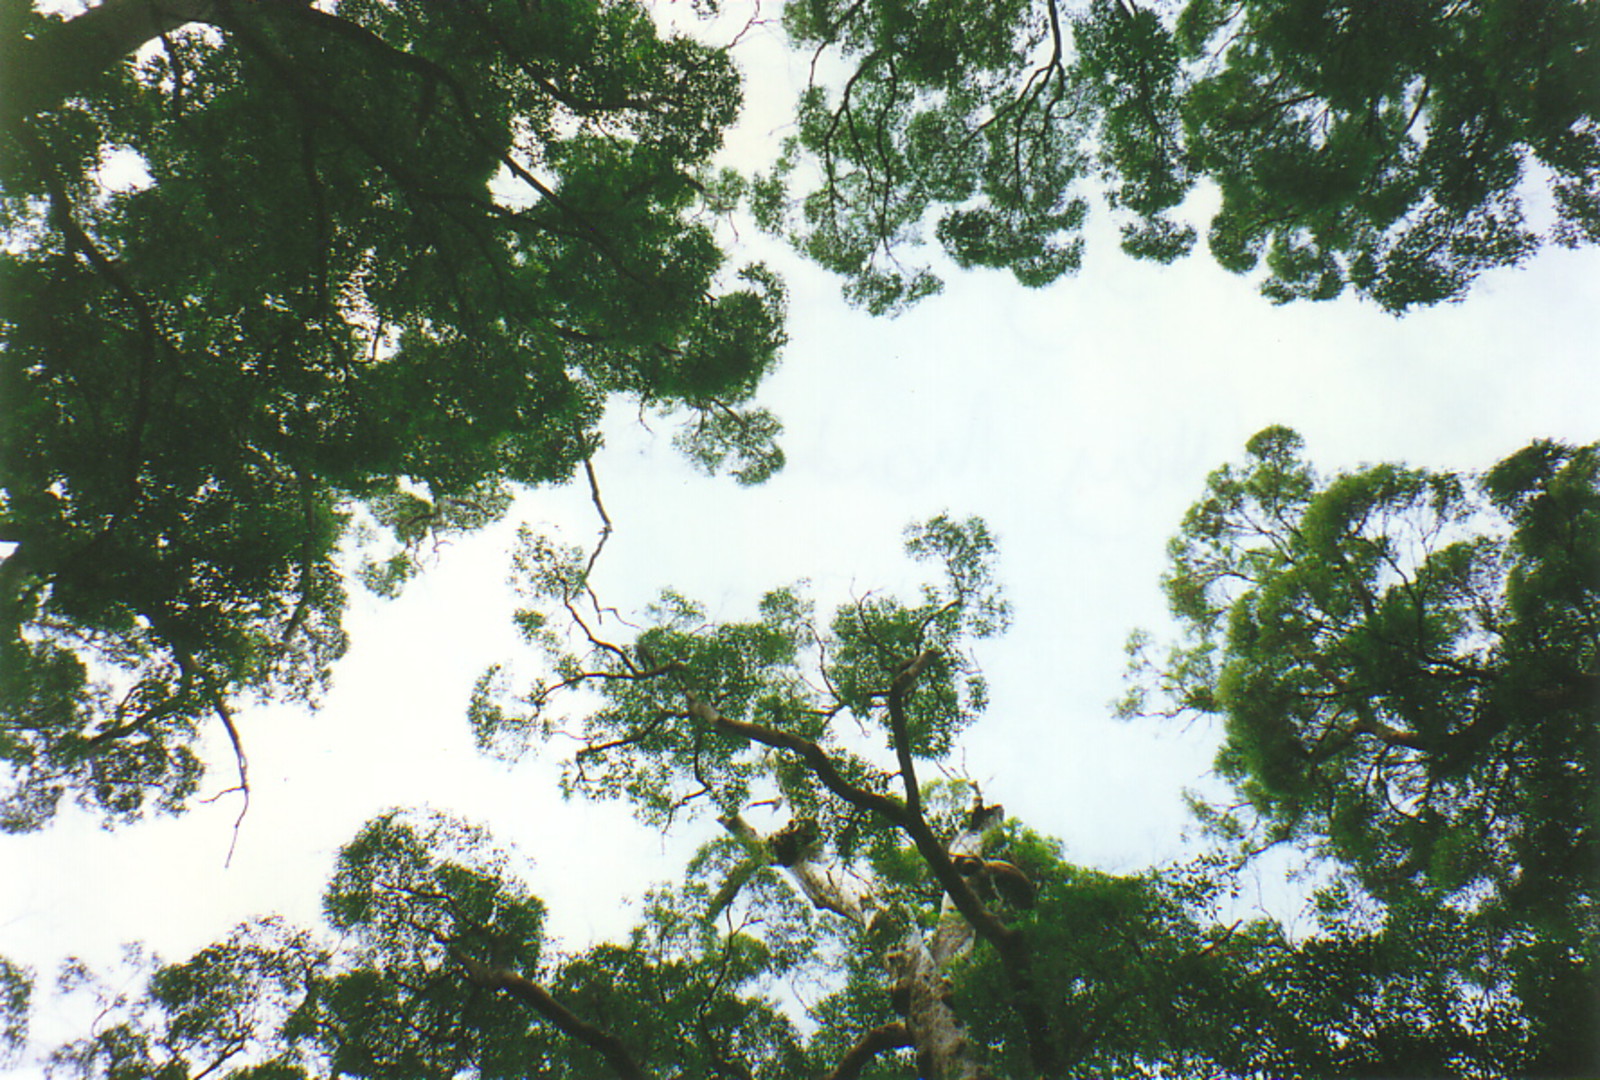 The view up into the canopy of the karri forests